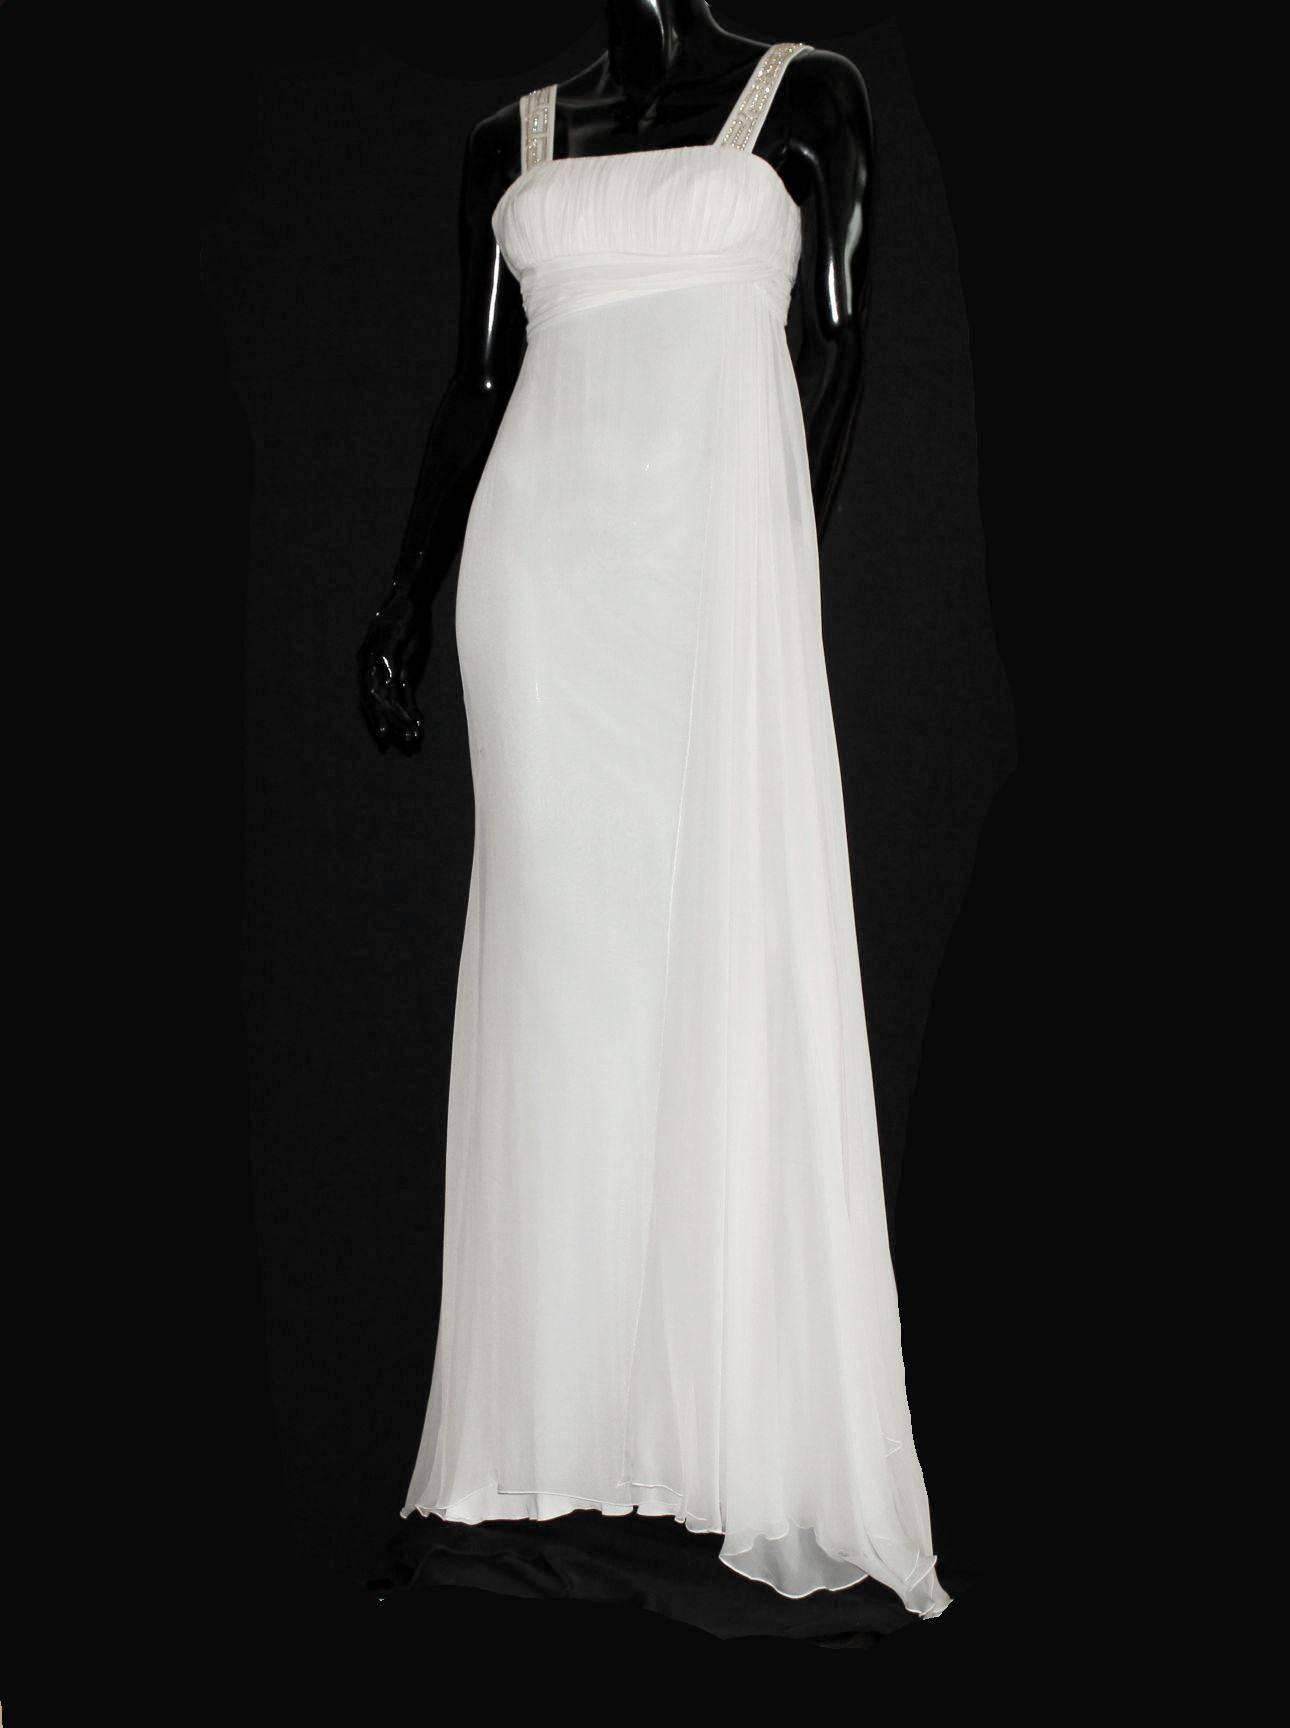 Incredible Versace Grecian Goddess Silk Evening Gown

    Gorgeous off-white evening gown inspired by the Grecian goddesses by Versace
    Beautiful decorated shoulder straps with golden Swarovski crystal Grecian Meander pattern - so Versace!
   